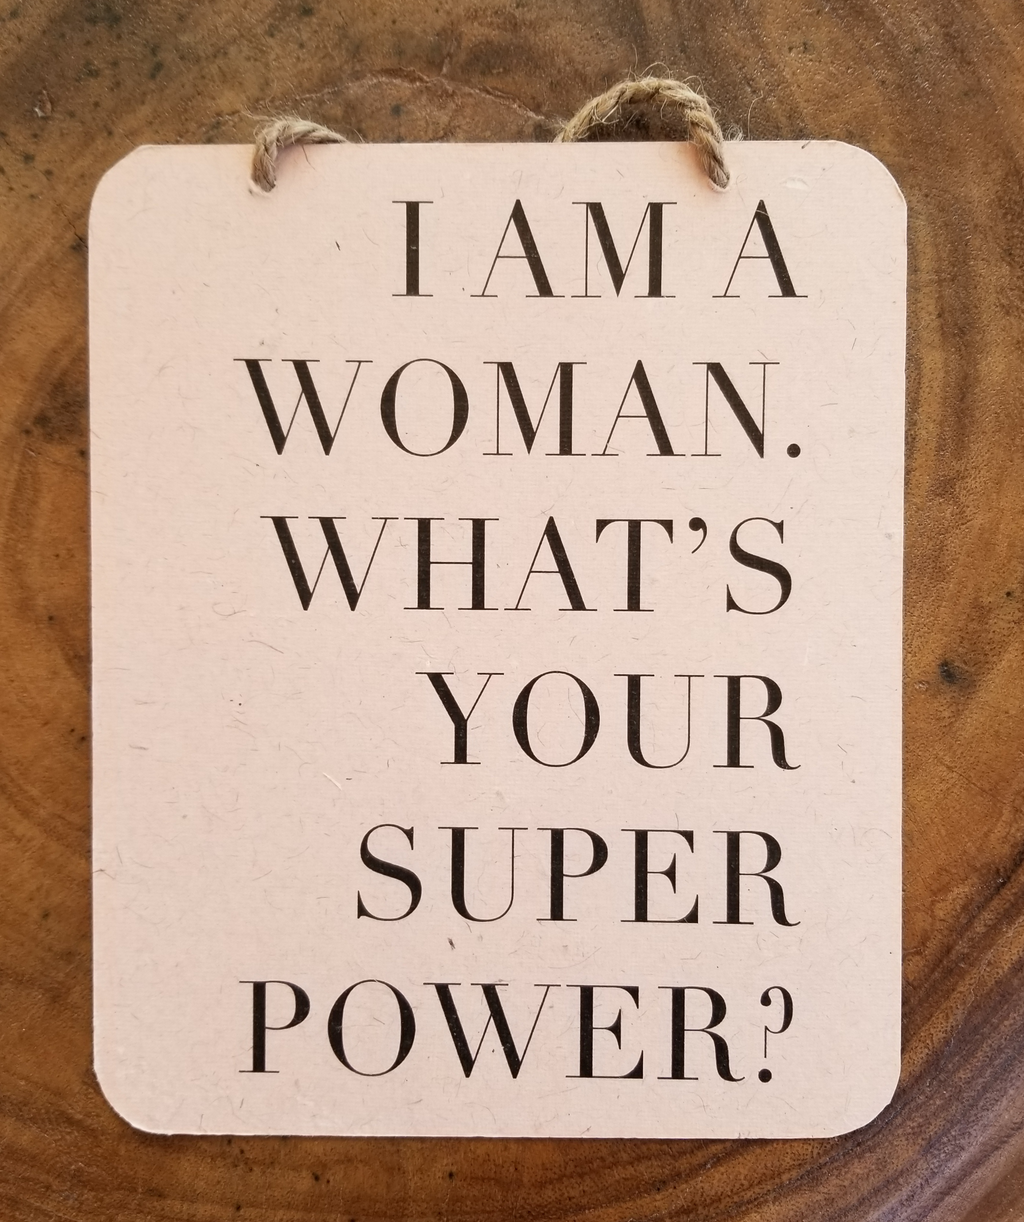 I AM A WOMAN, WHAT'S YOUR SUPERPOWER?